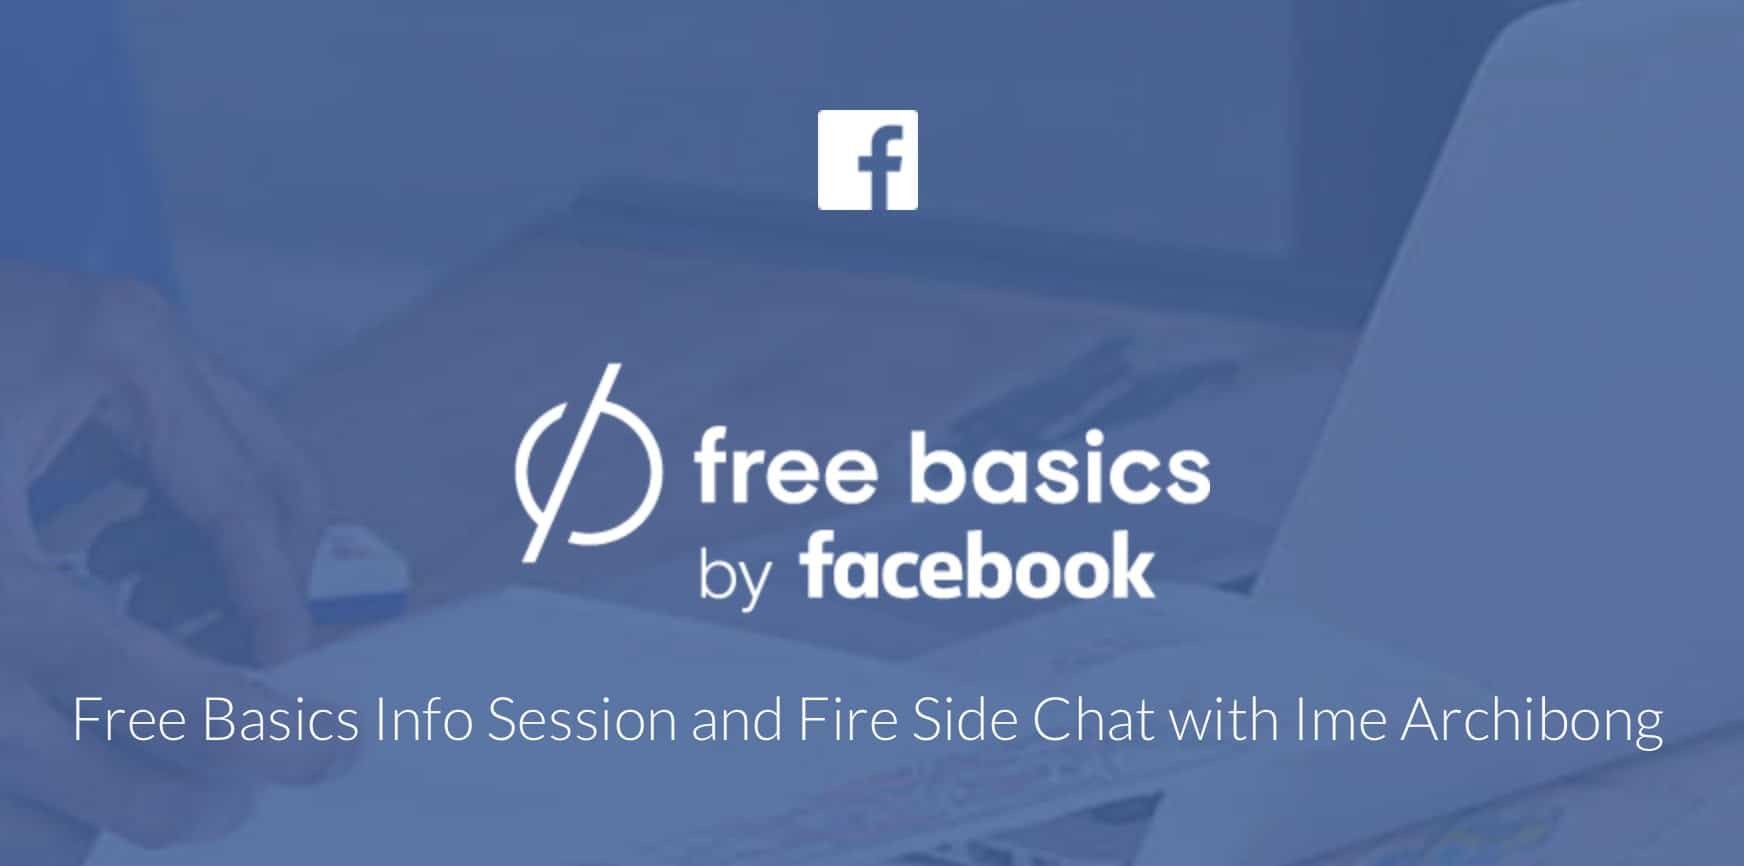 Facebook Free Basic: l'internet low cost